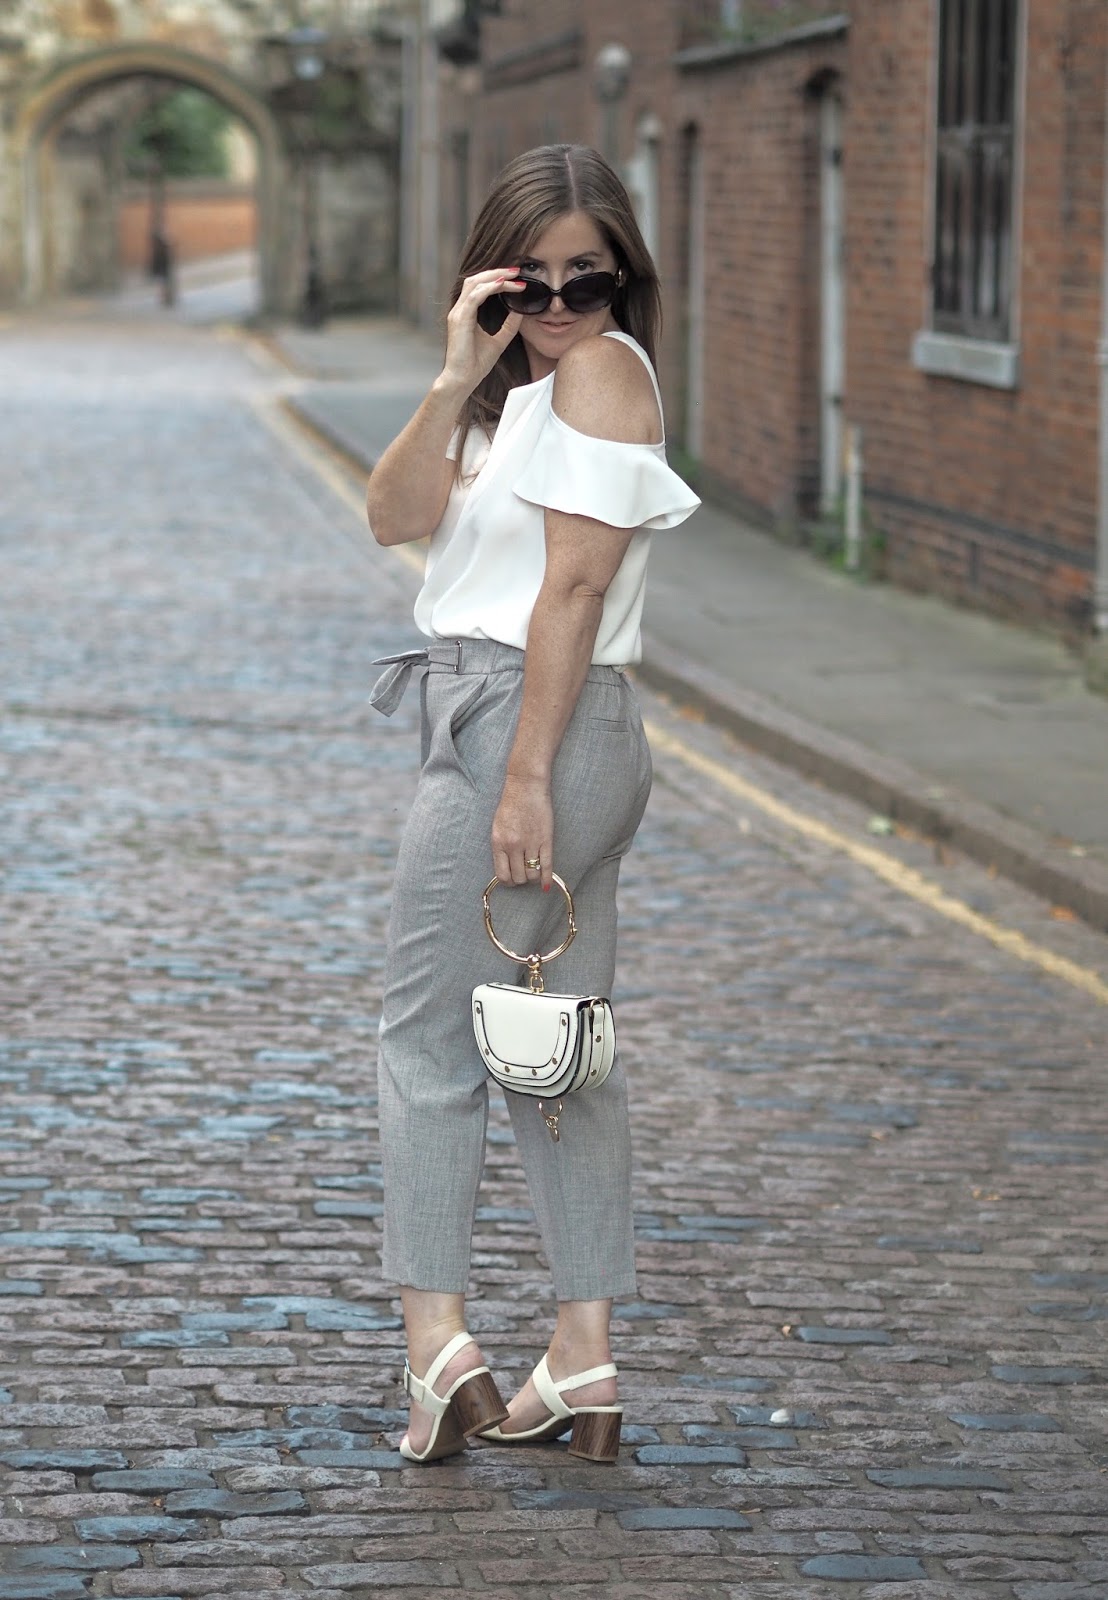 Shein \ designer dupes \ fashion \ style \ trend \ Chloé Nile \  grey cropped trousers \ handbag \ Priceless Life of Mine \ over 40 lifestyle blog